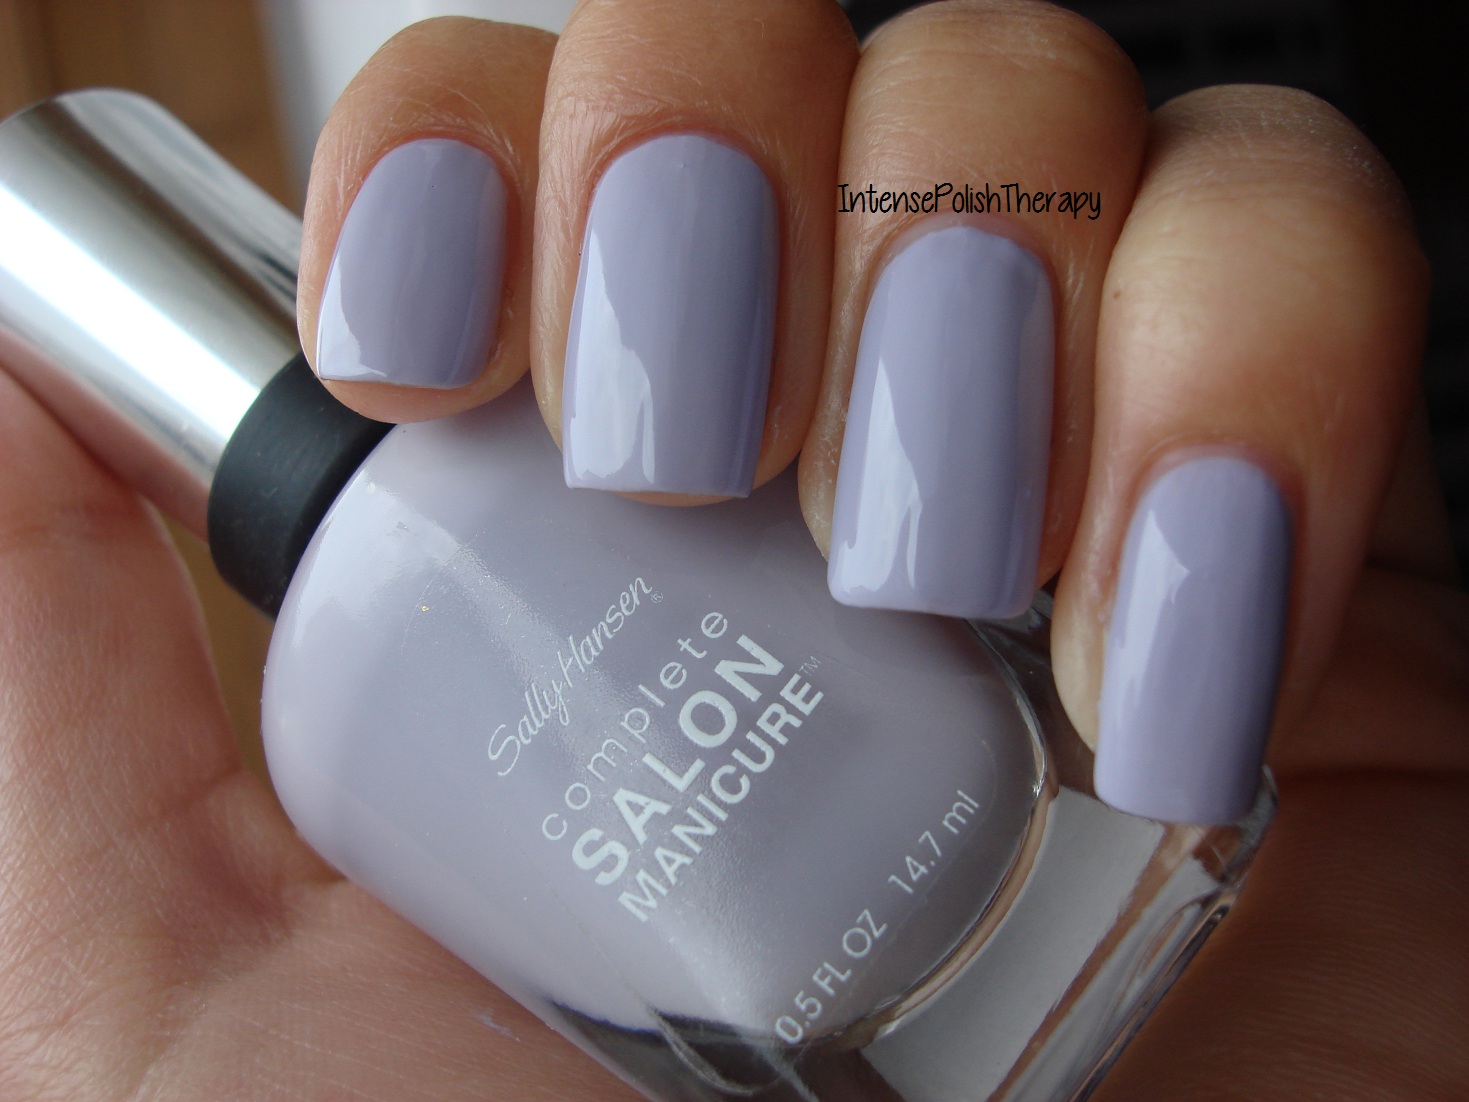 Intense Polish Therapy: Sally Hansen Complete Salon Manicure Swatches ...